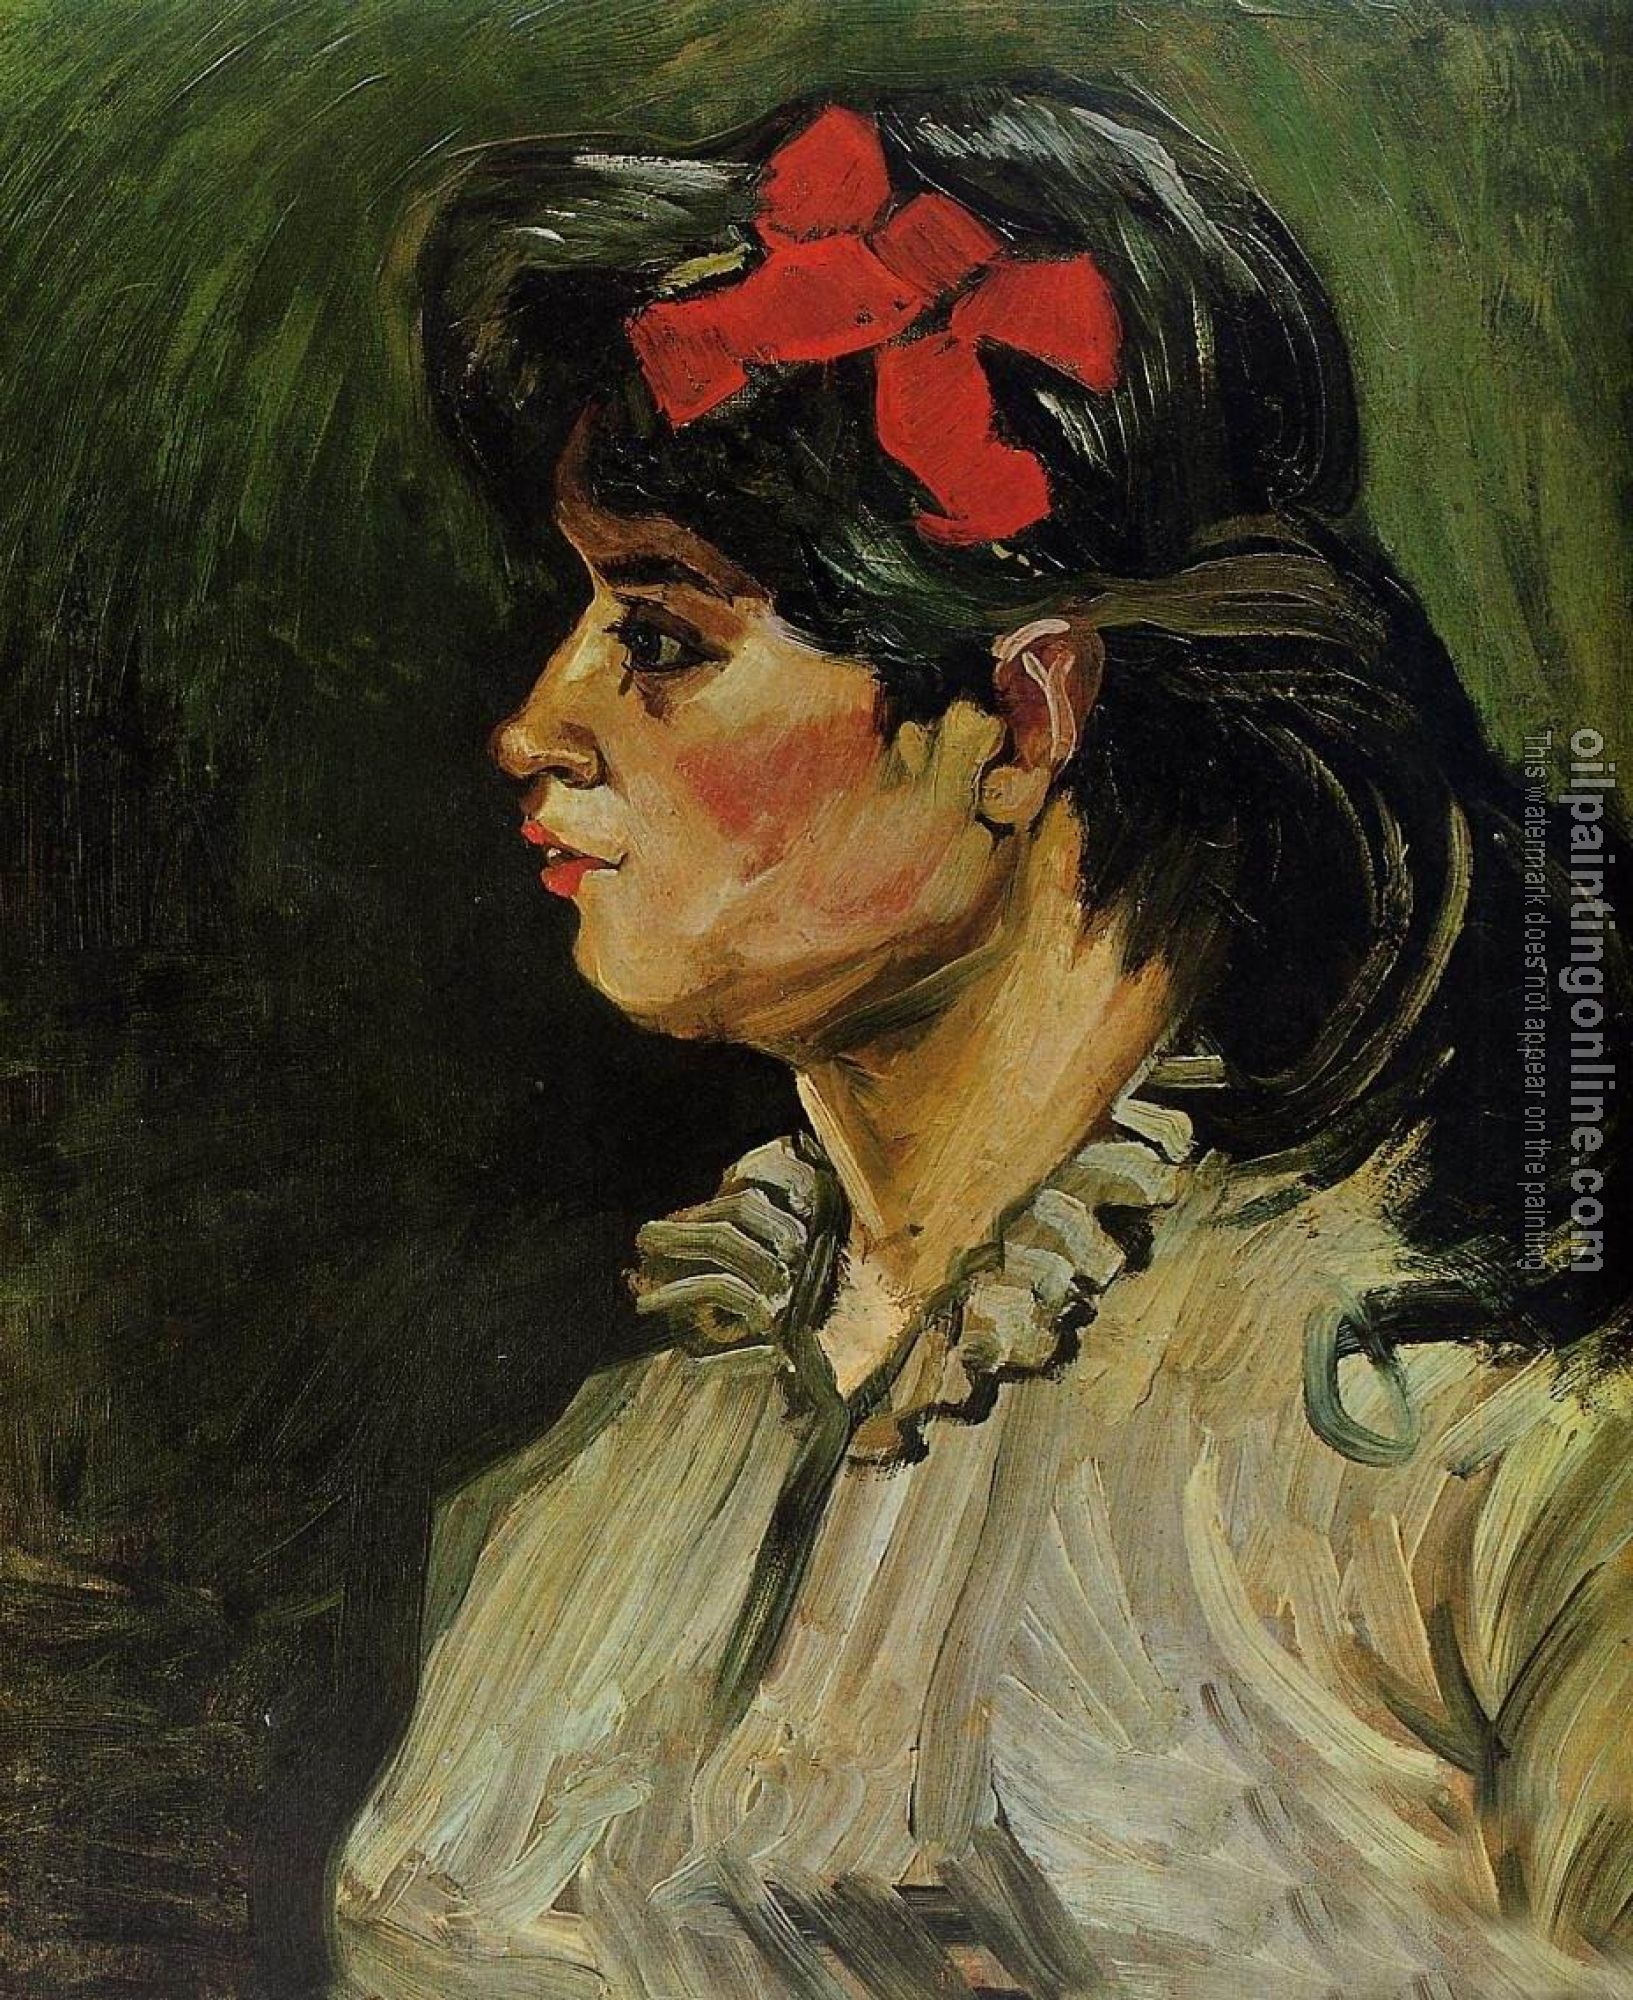 Gogh, Vincent van - Portrait of a Woman with a Scarlet Bow in Her Hair